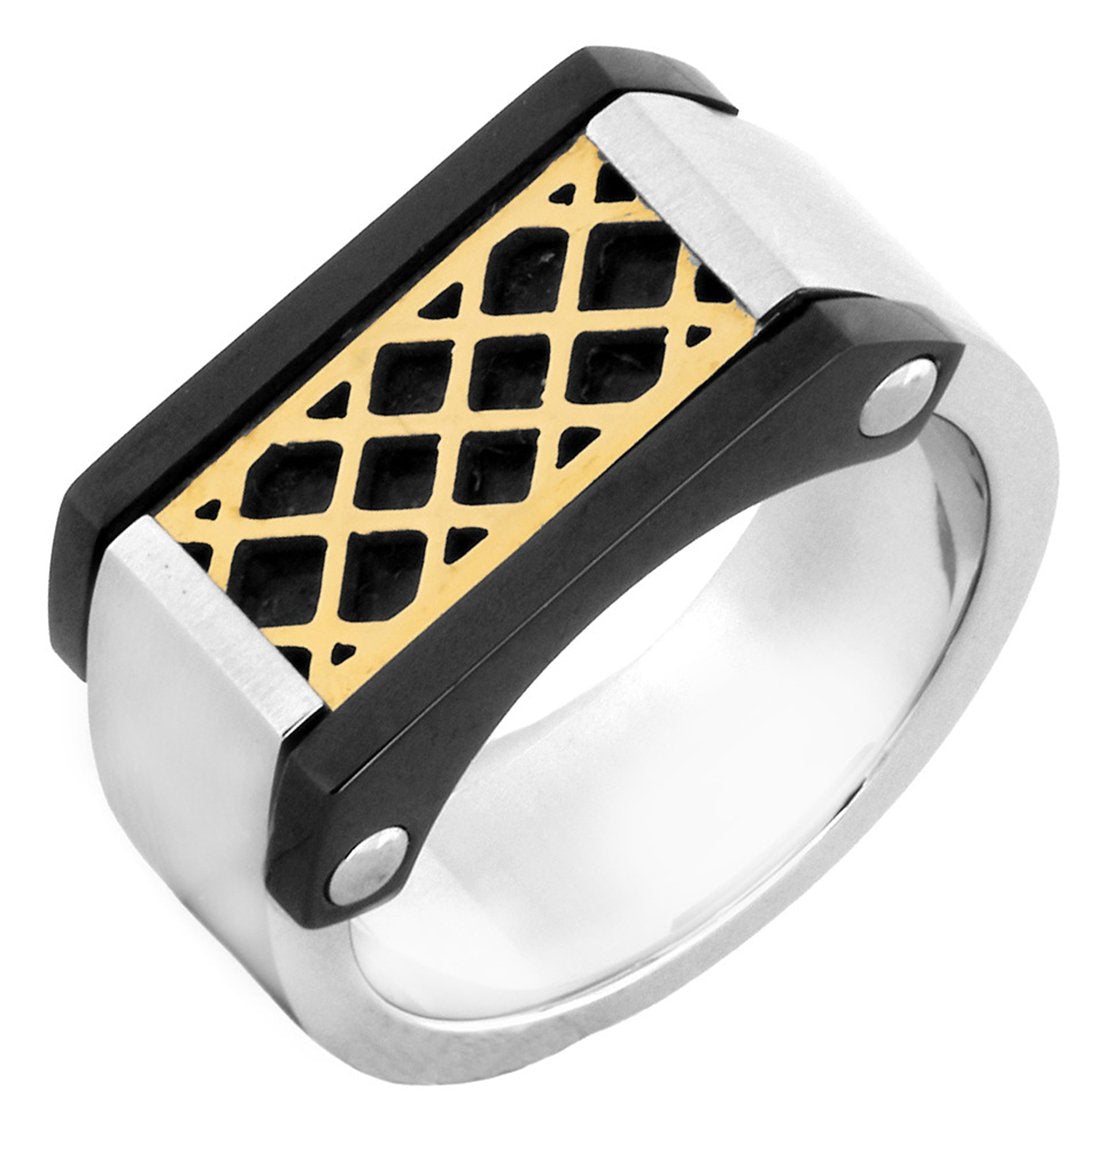 22K Ring For Baby Boy - BjRi16696 - 22K Gold Ring for boys designed with  machine cuts in matte and shine finish combination.